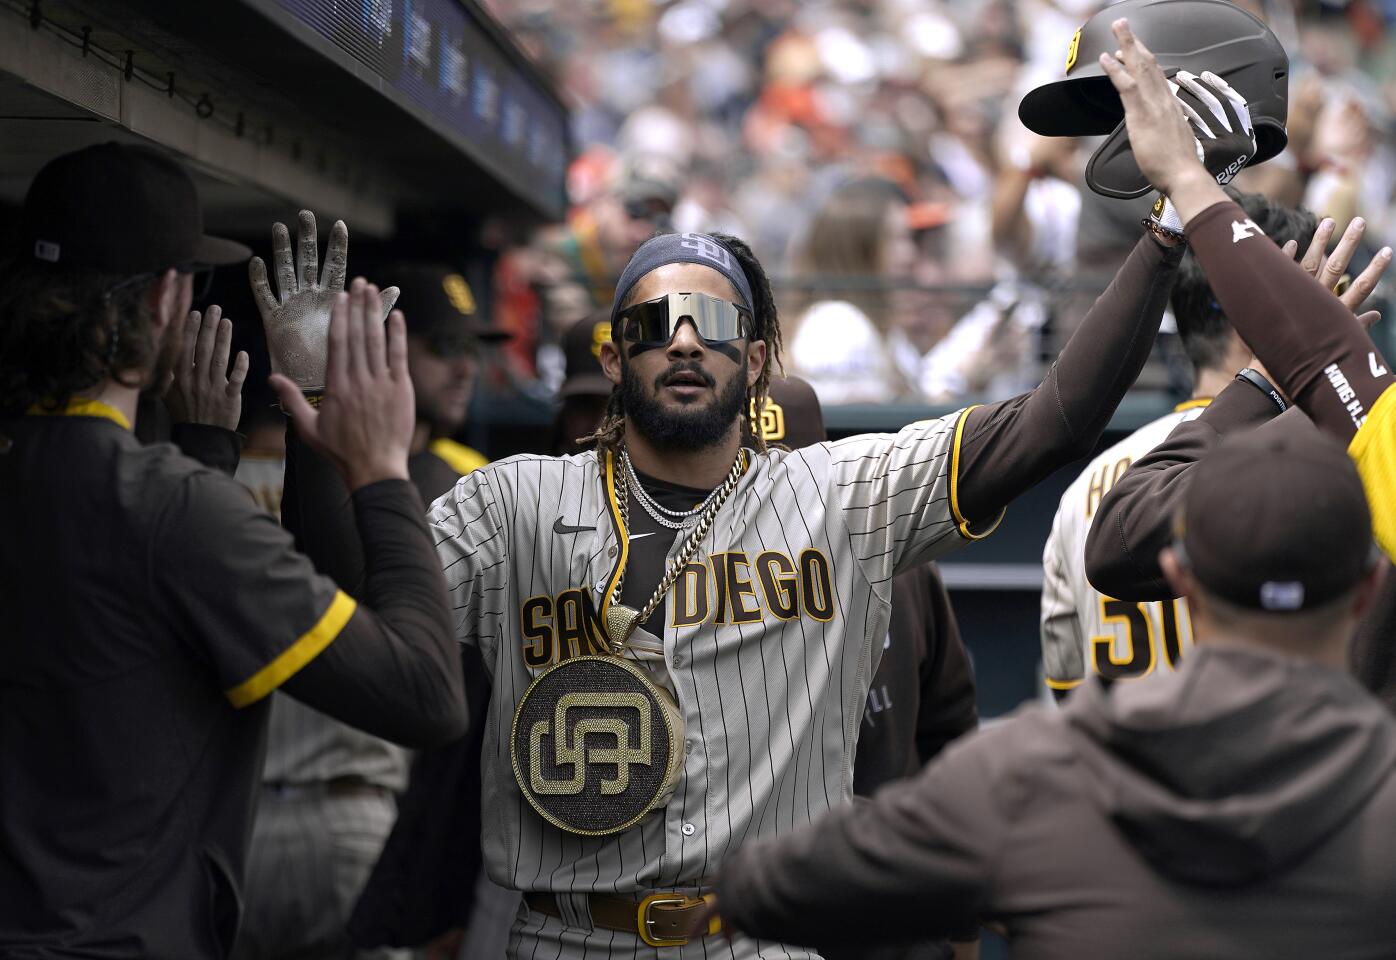 Padres on deck: Wild-card spot on the line in St. Louis - The San